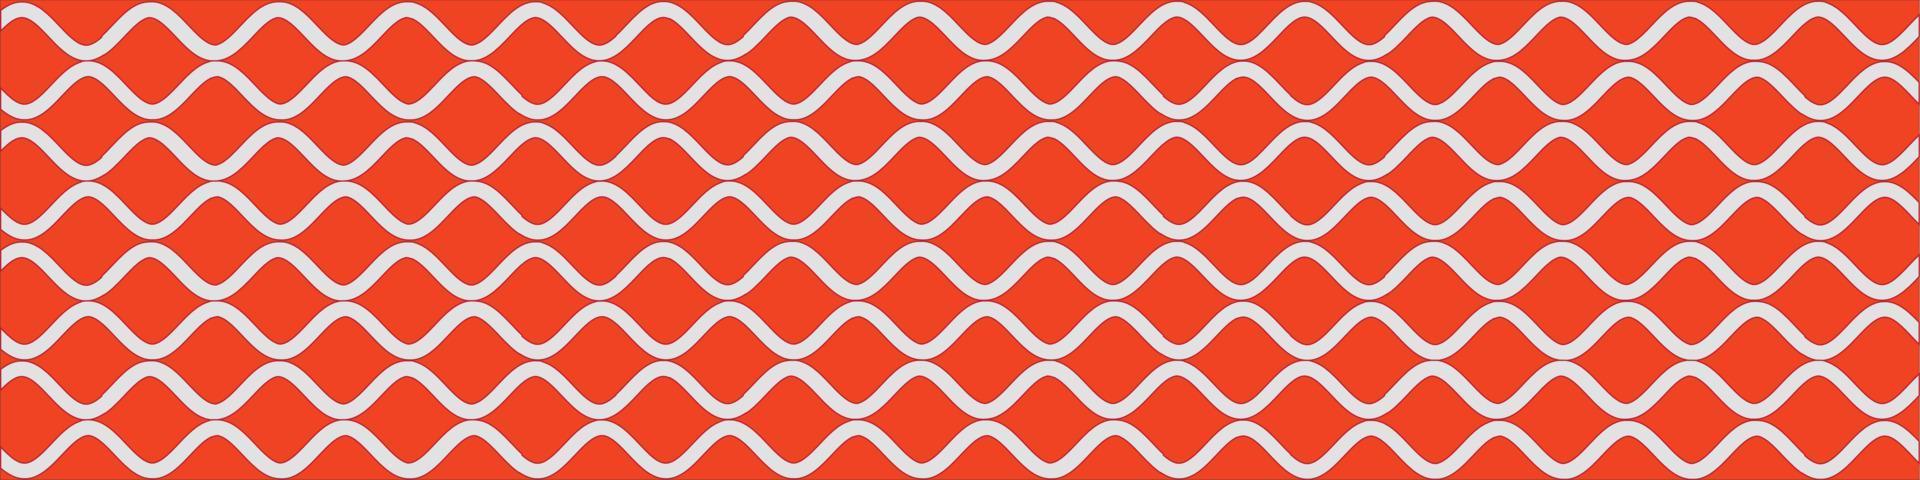 Horizontal background made of curved white lines orange background vector